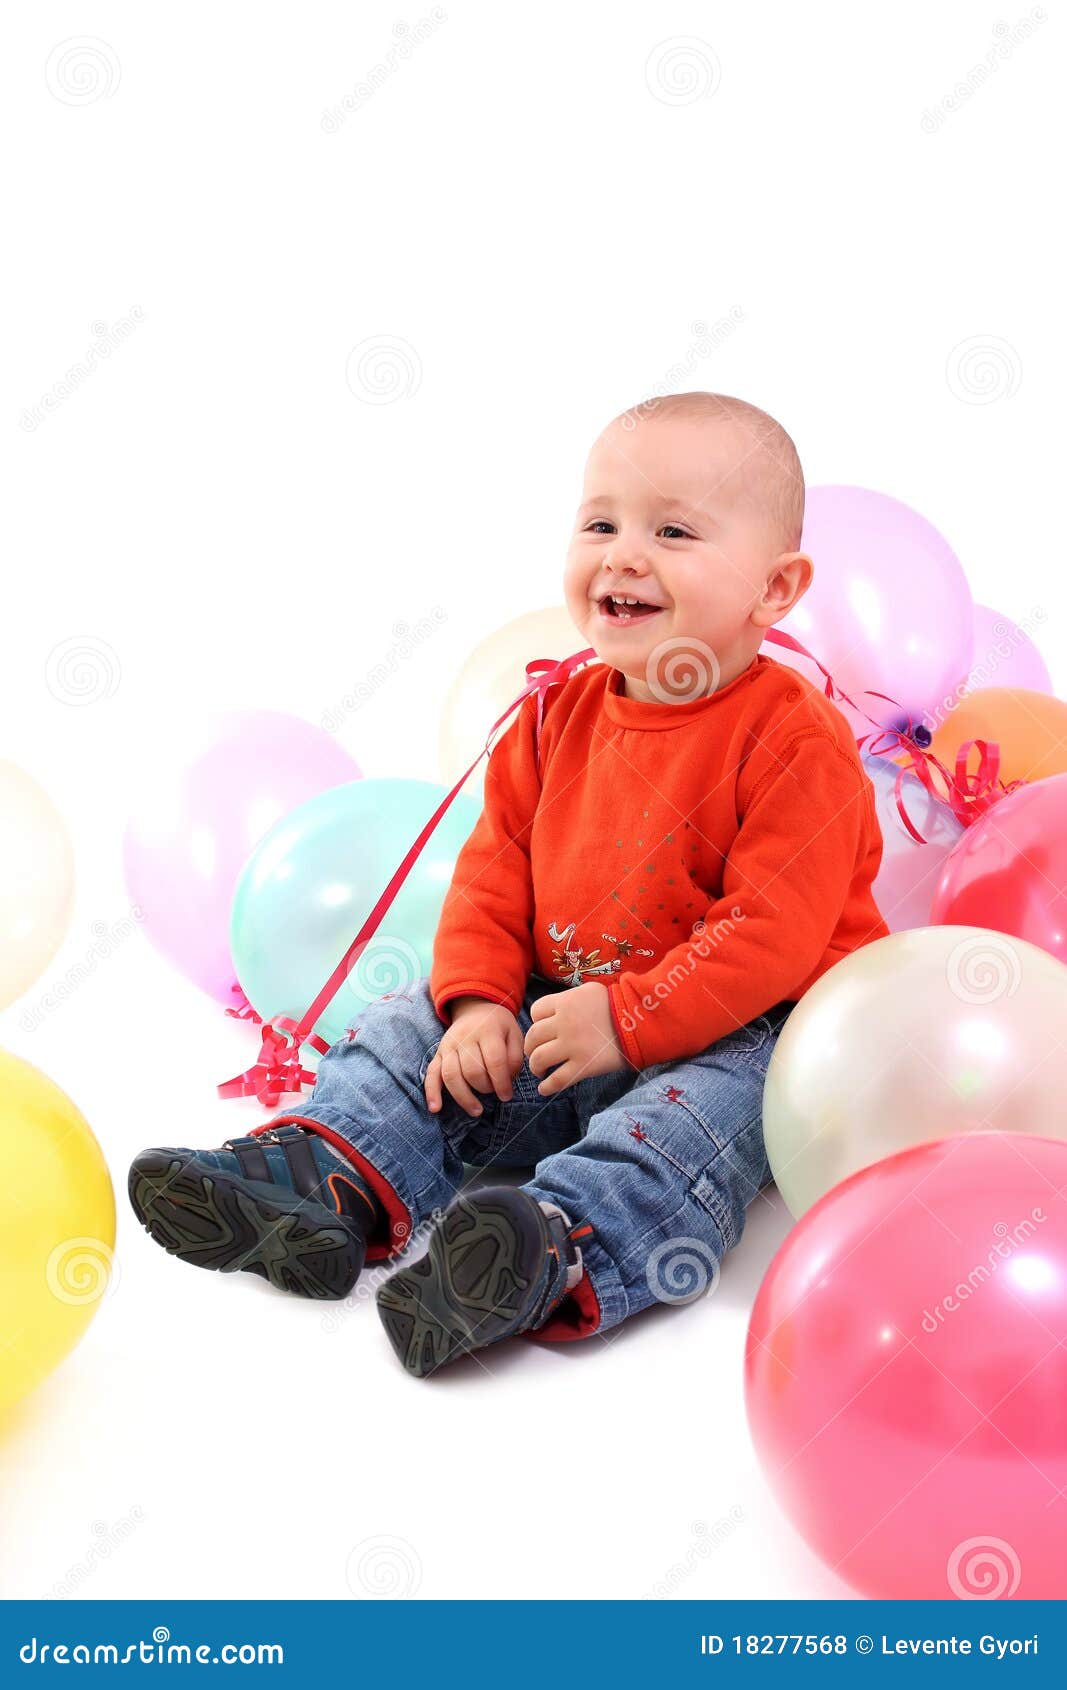 Smiling baby with balloons stock photo. Image of group - 18277568